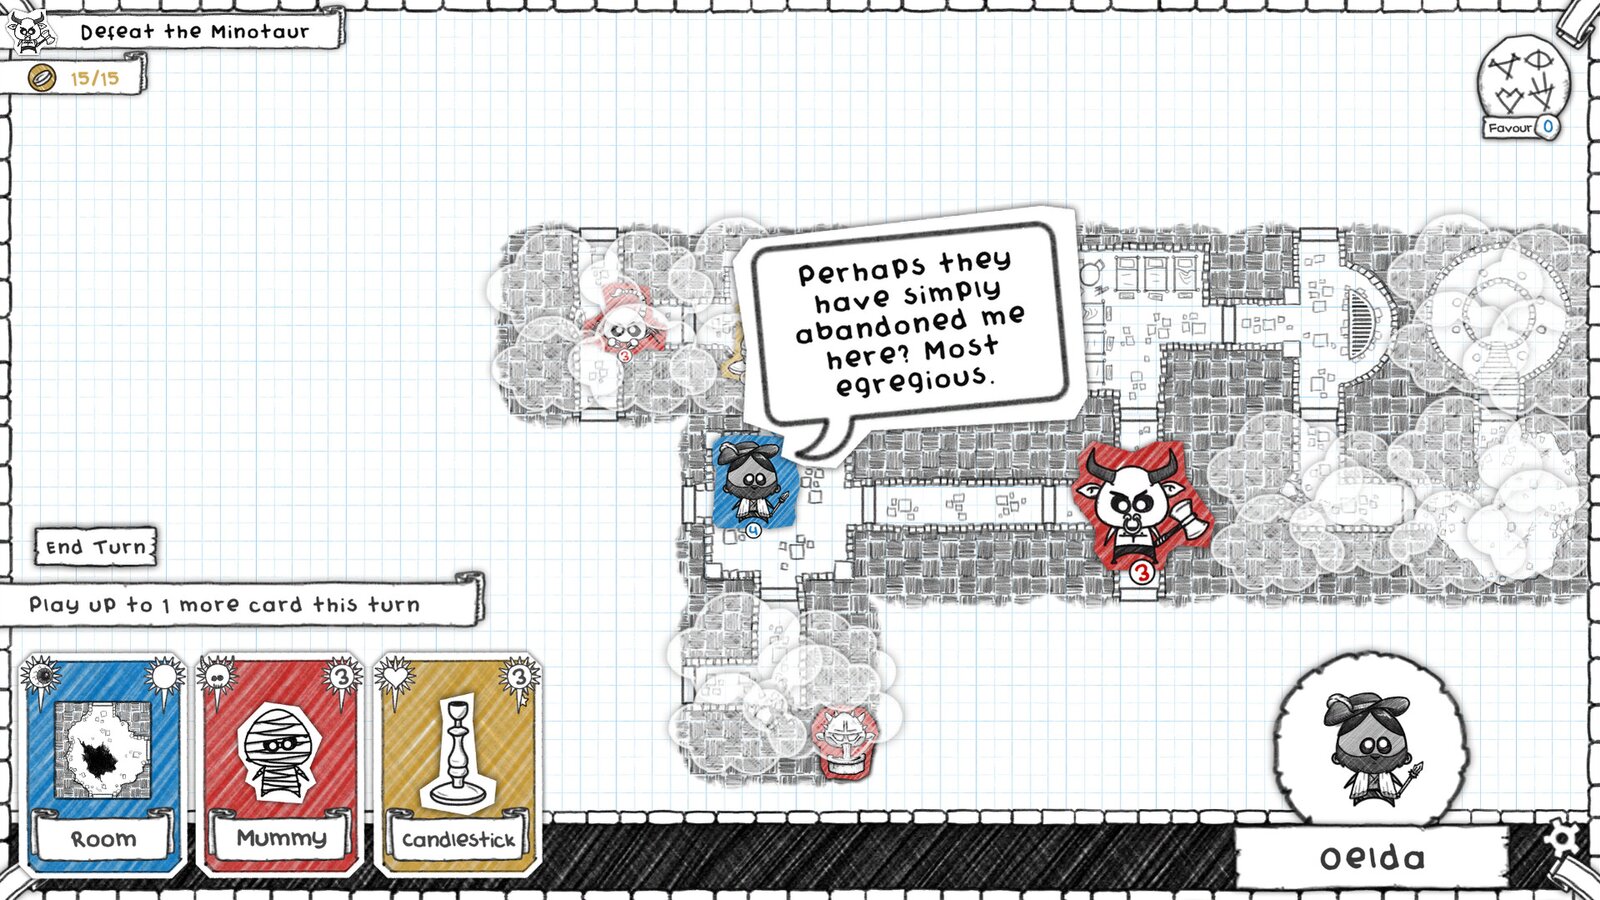 Guild of Dungeoneering - Ultimate Edition